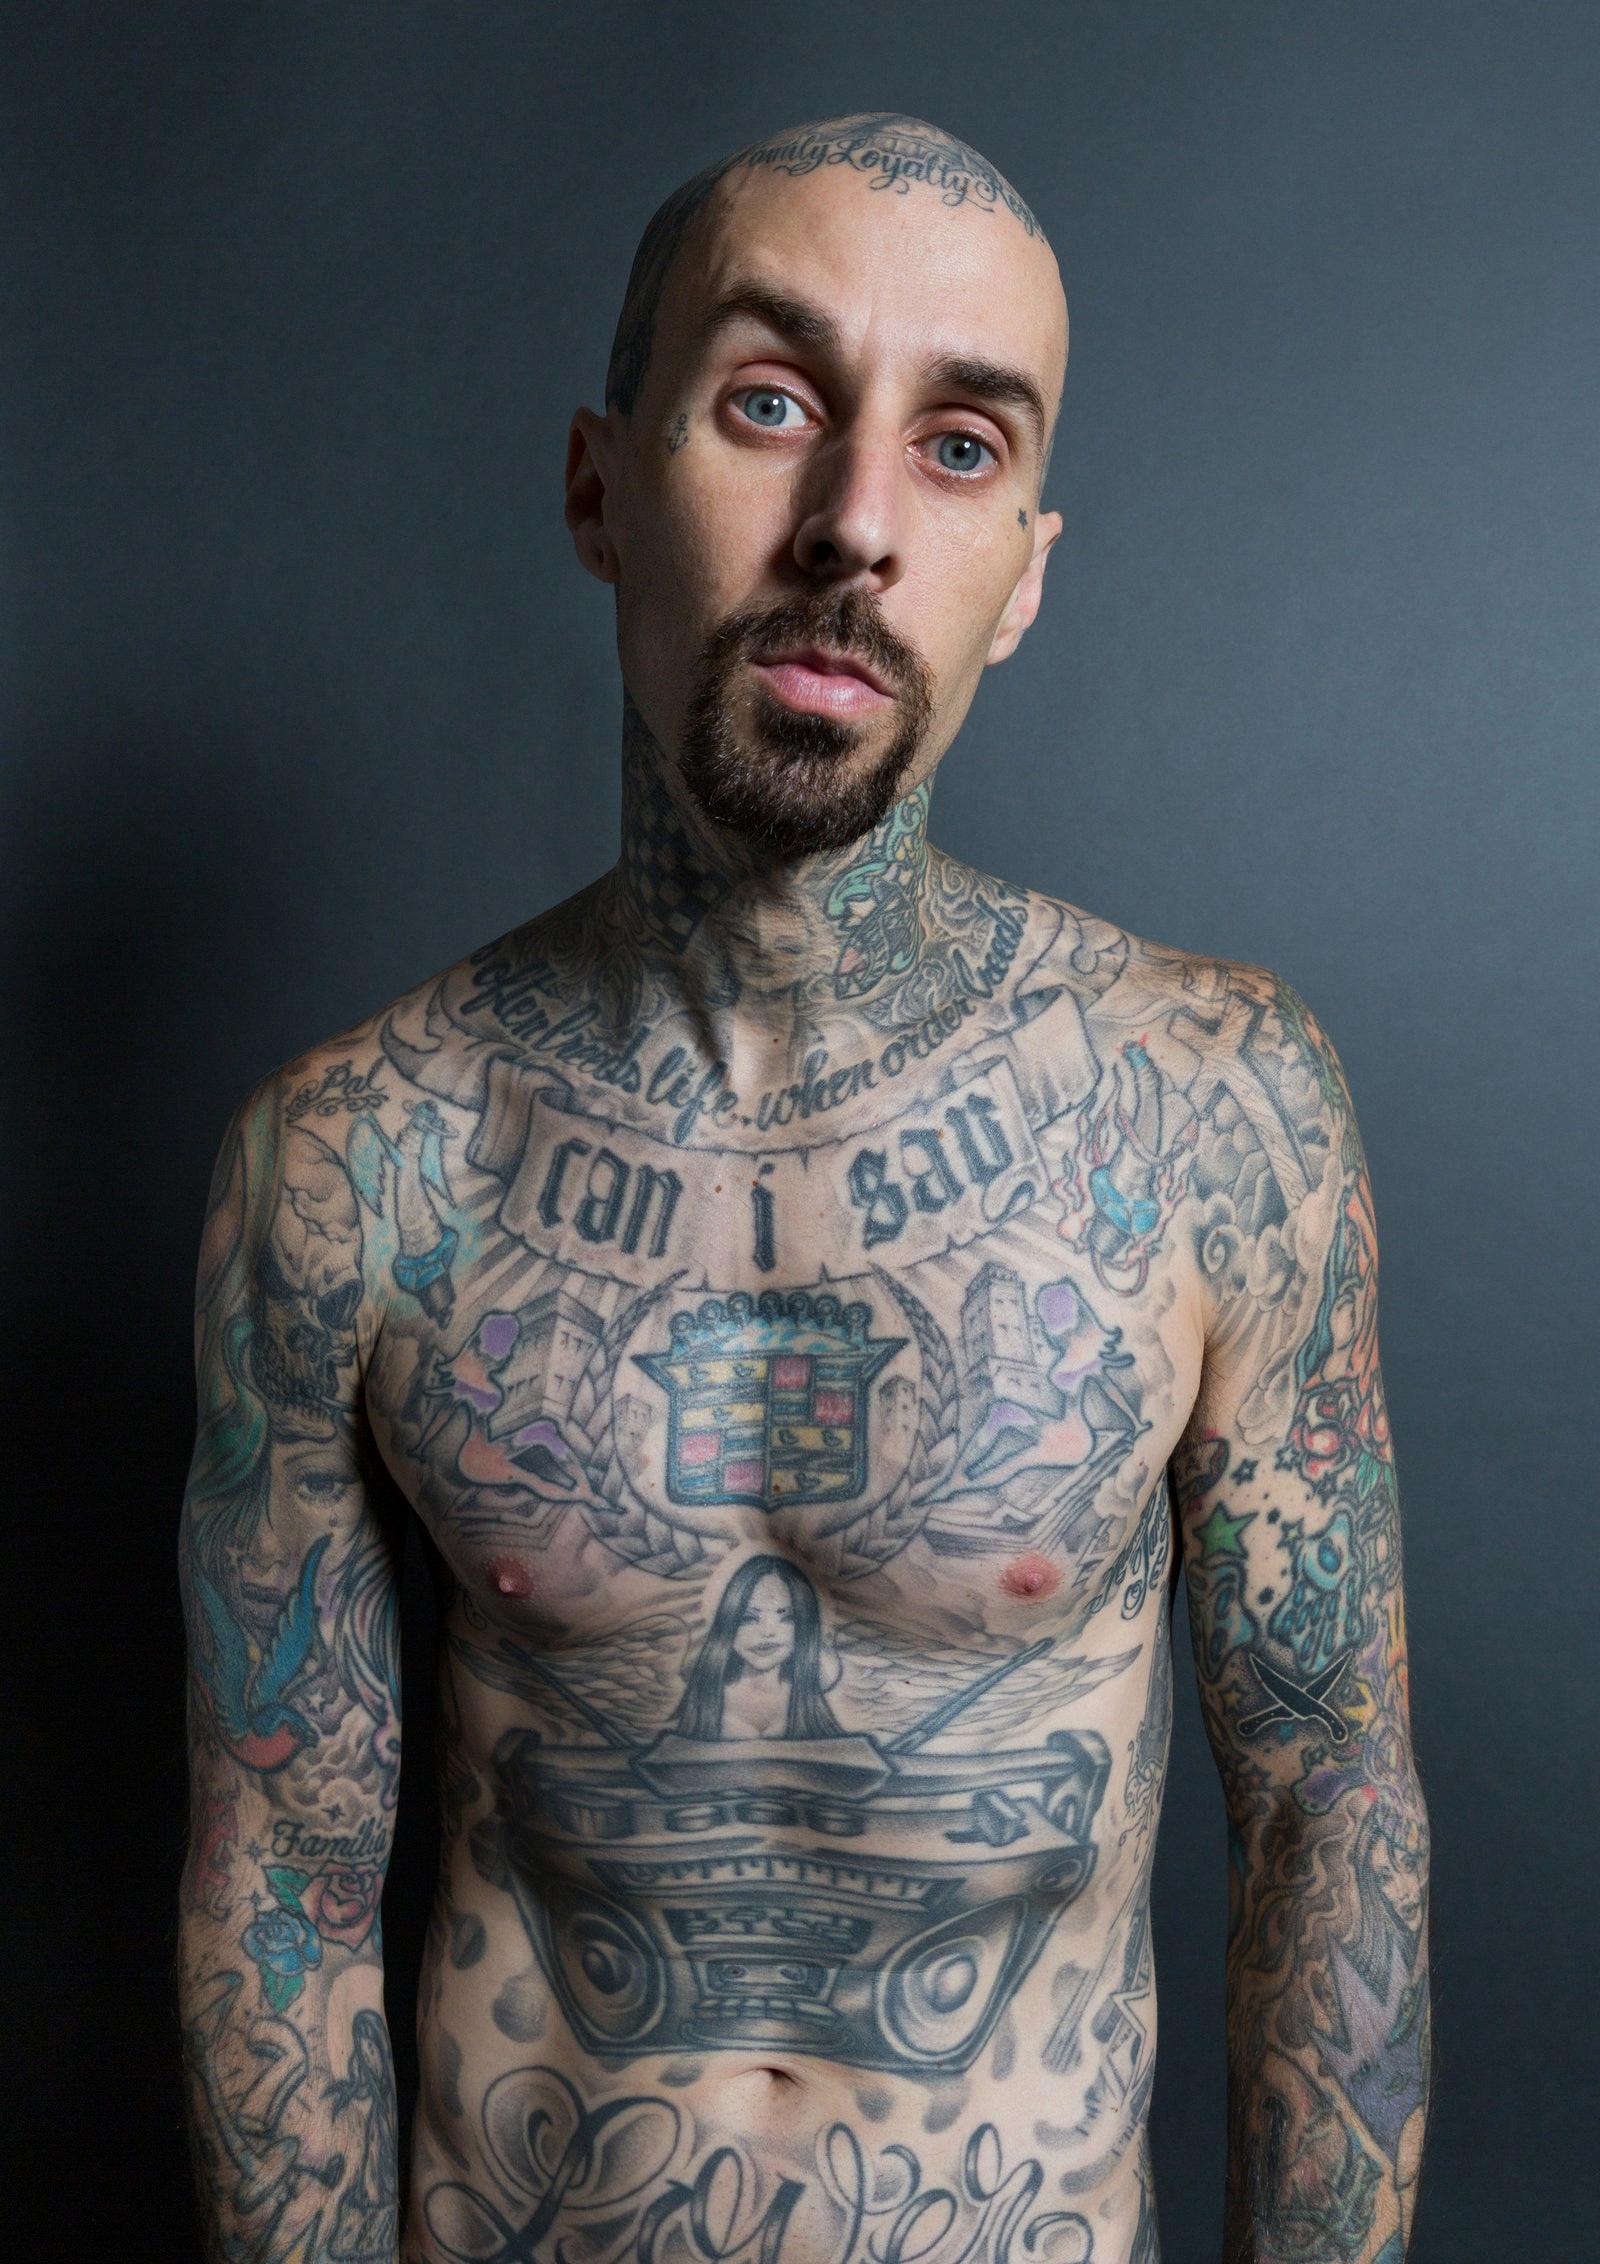 Get Personal with the Talented Travis Barker